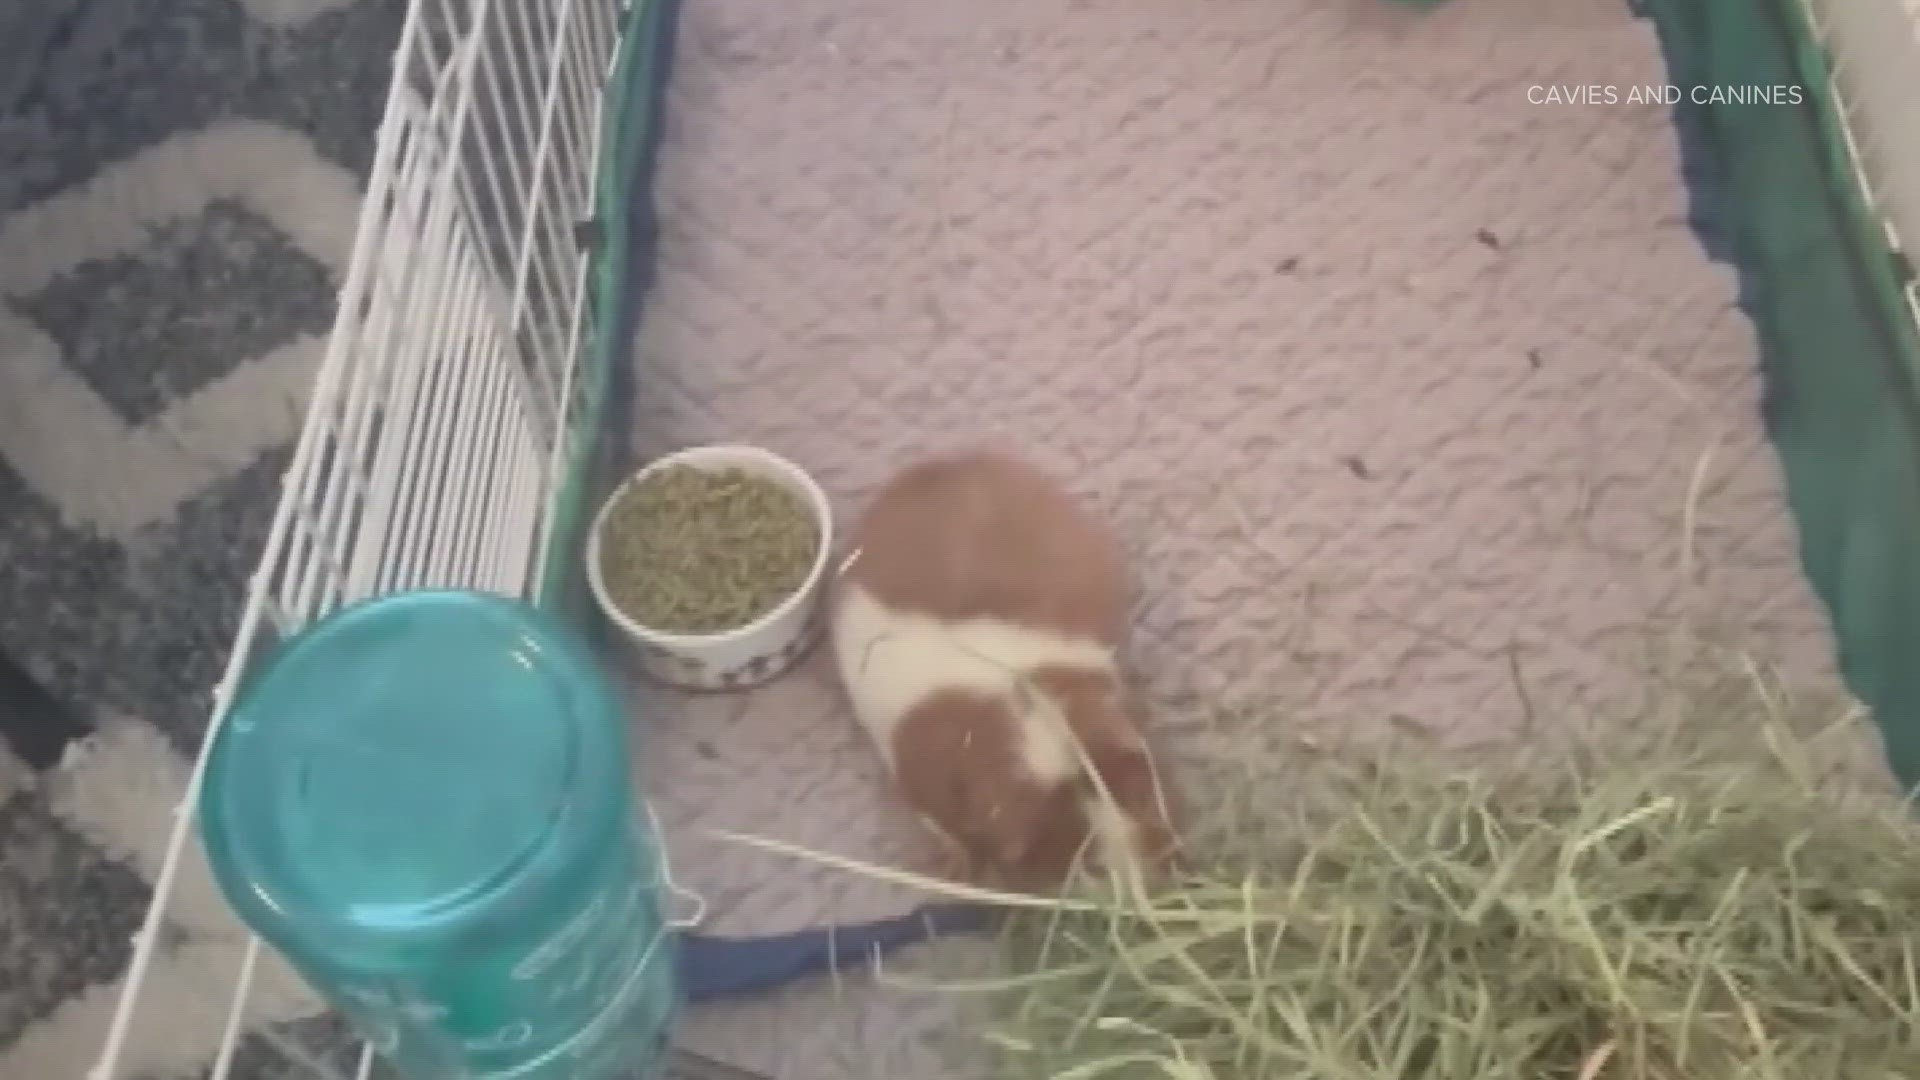 The guinea pigs were severely overcrowded and lacking food and water, the rescue group said.